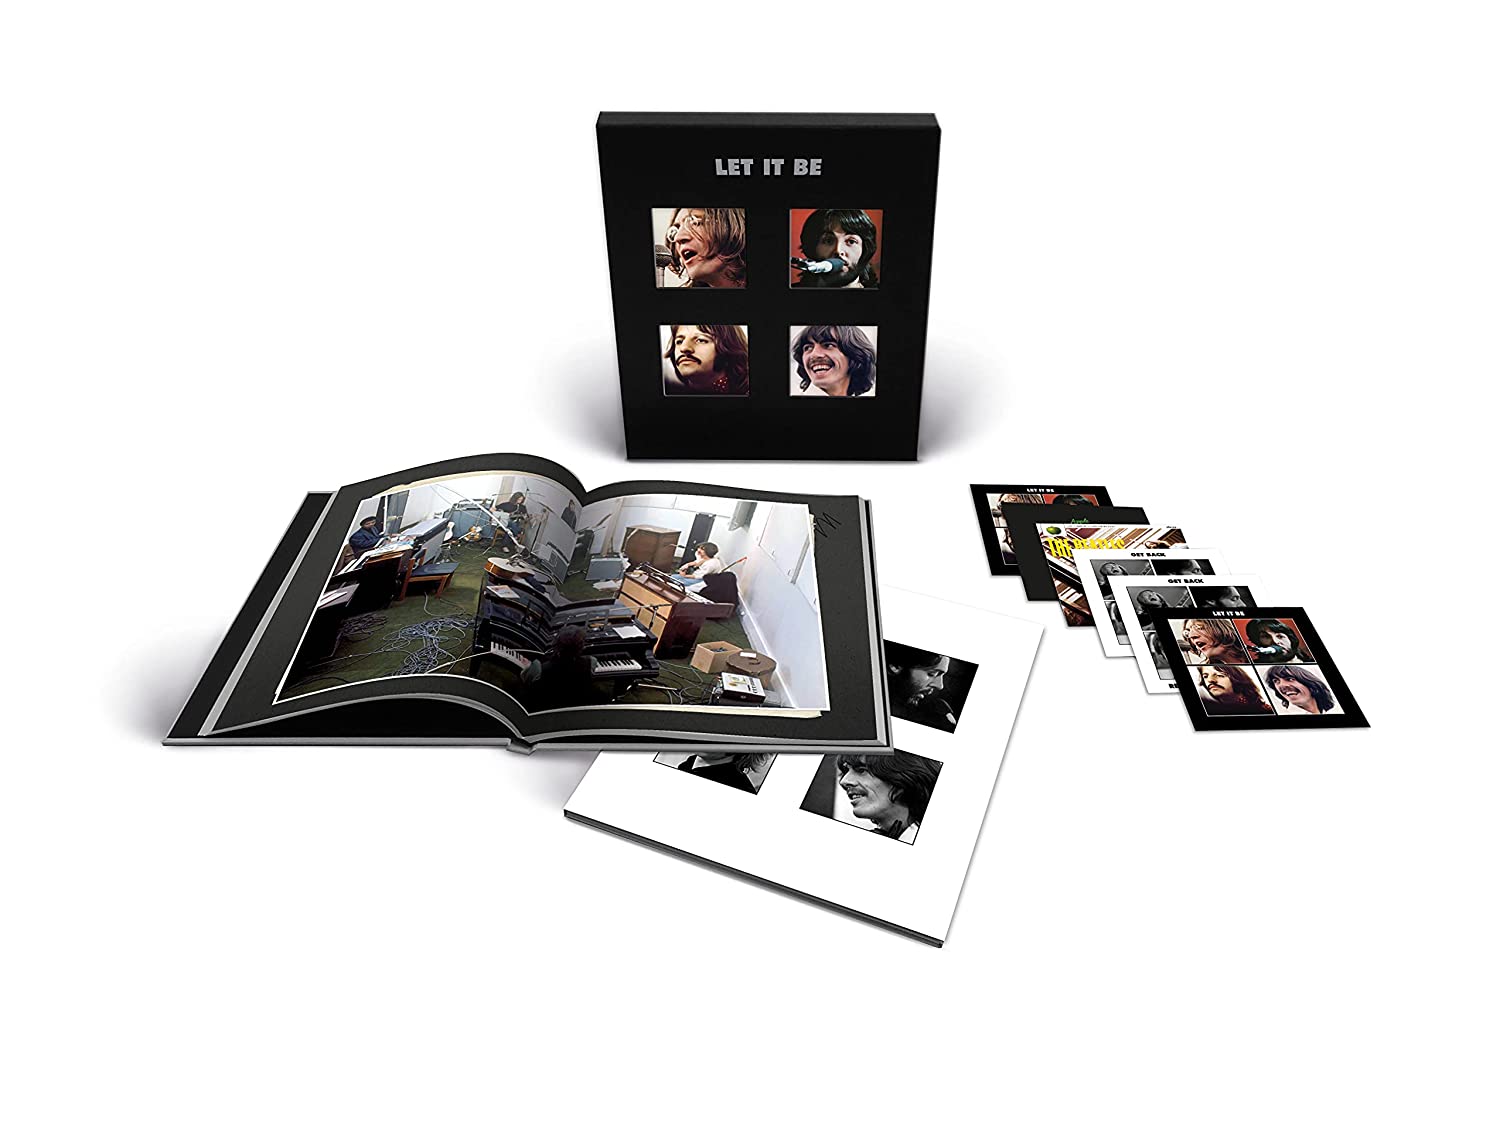 The Beatles: Let It Be Super Deluxe Special Edition